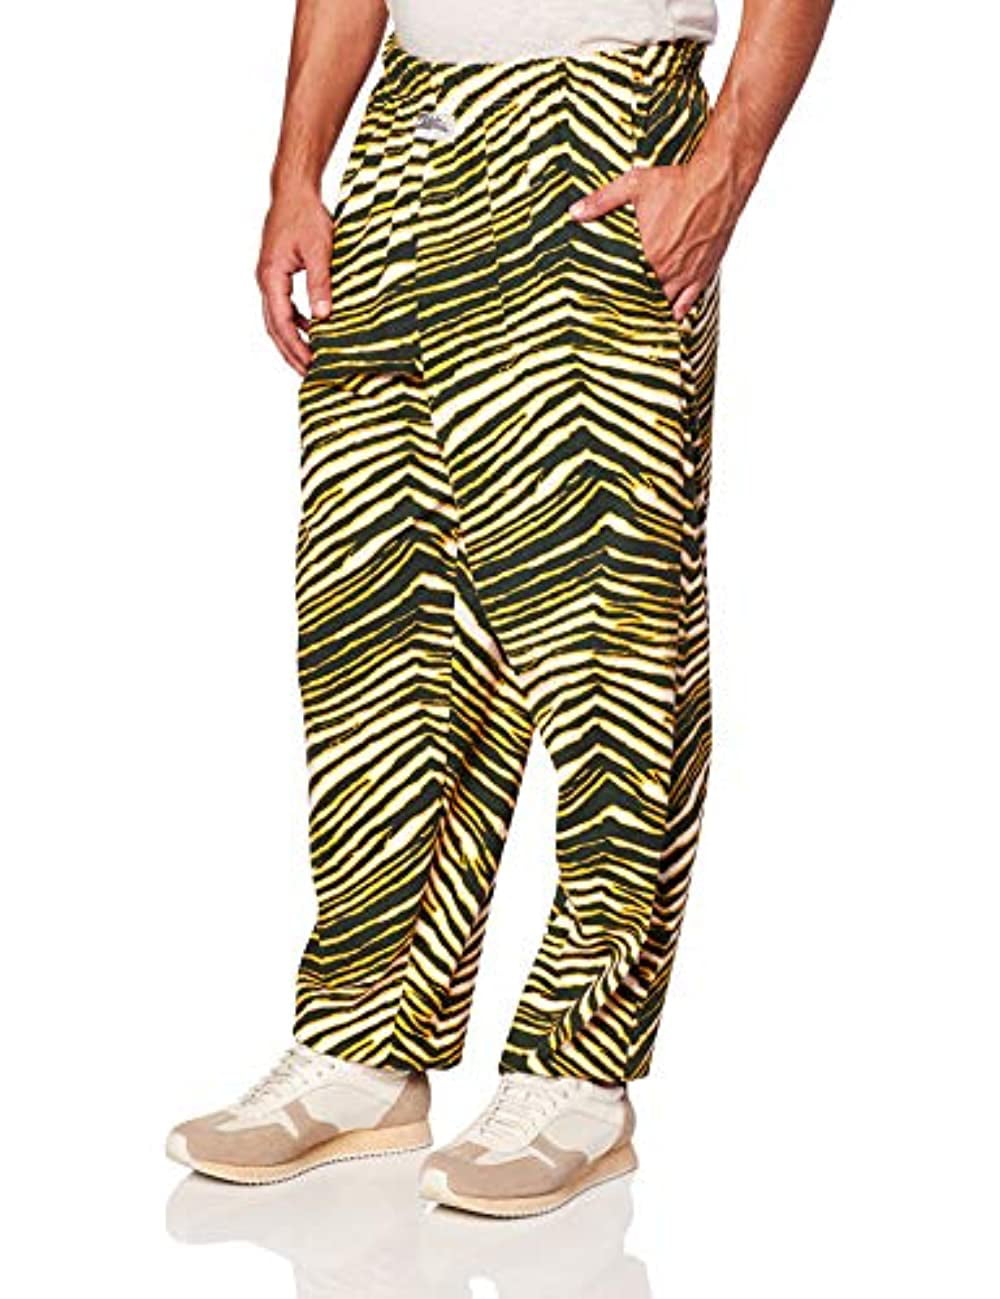 Team Color Zubaz Officially Licensed Mens NCAA Mens Casual Active Pants 